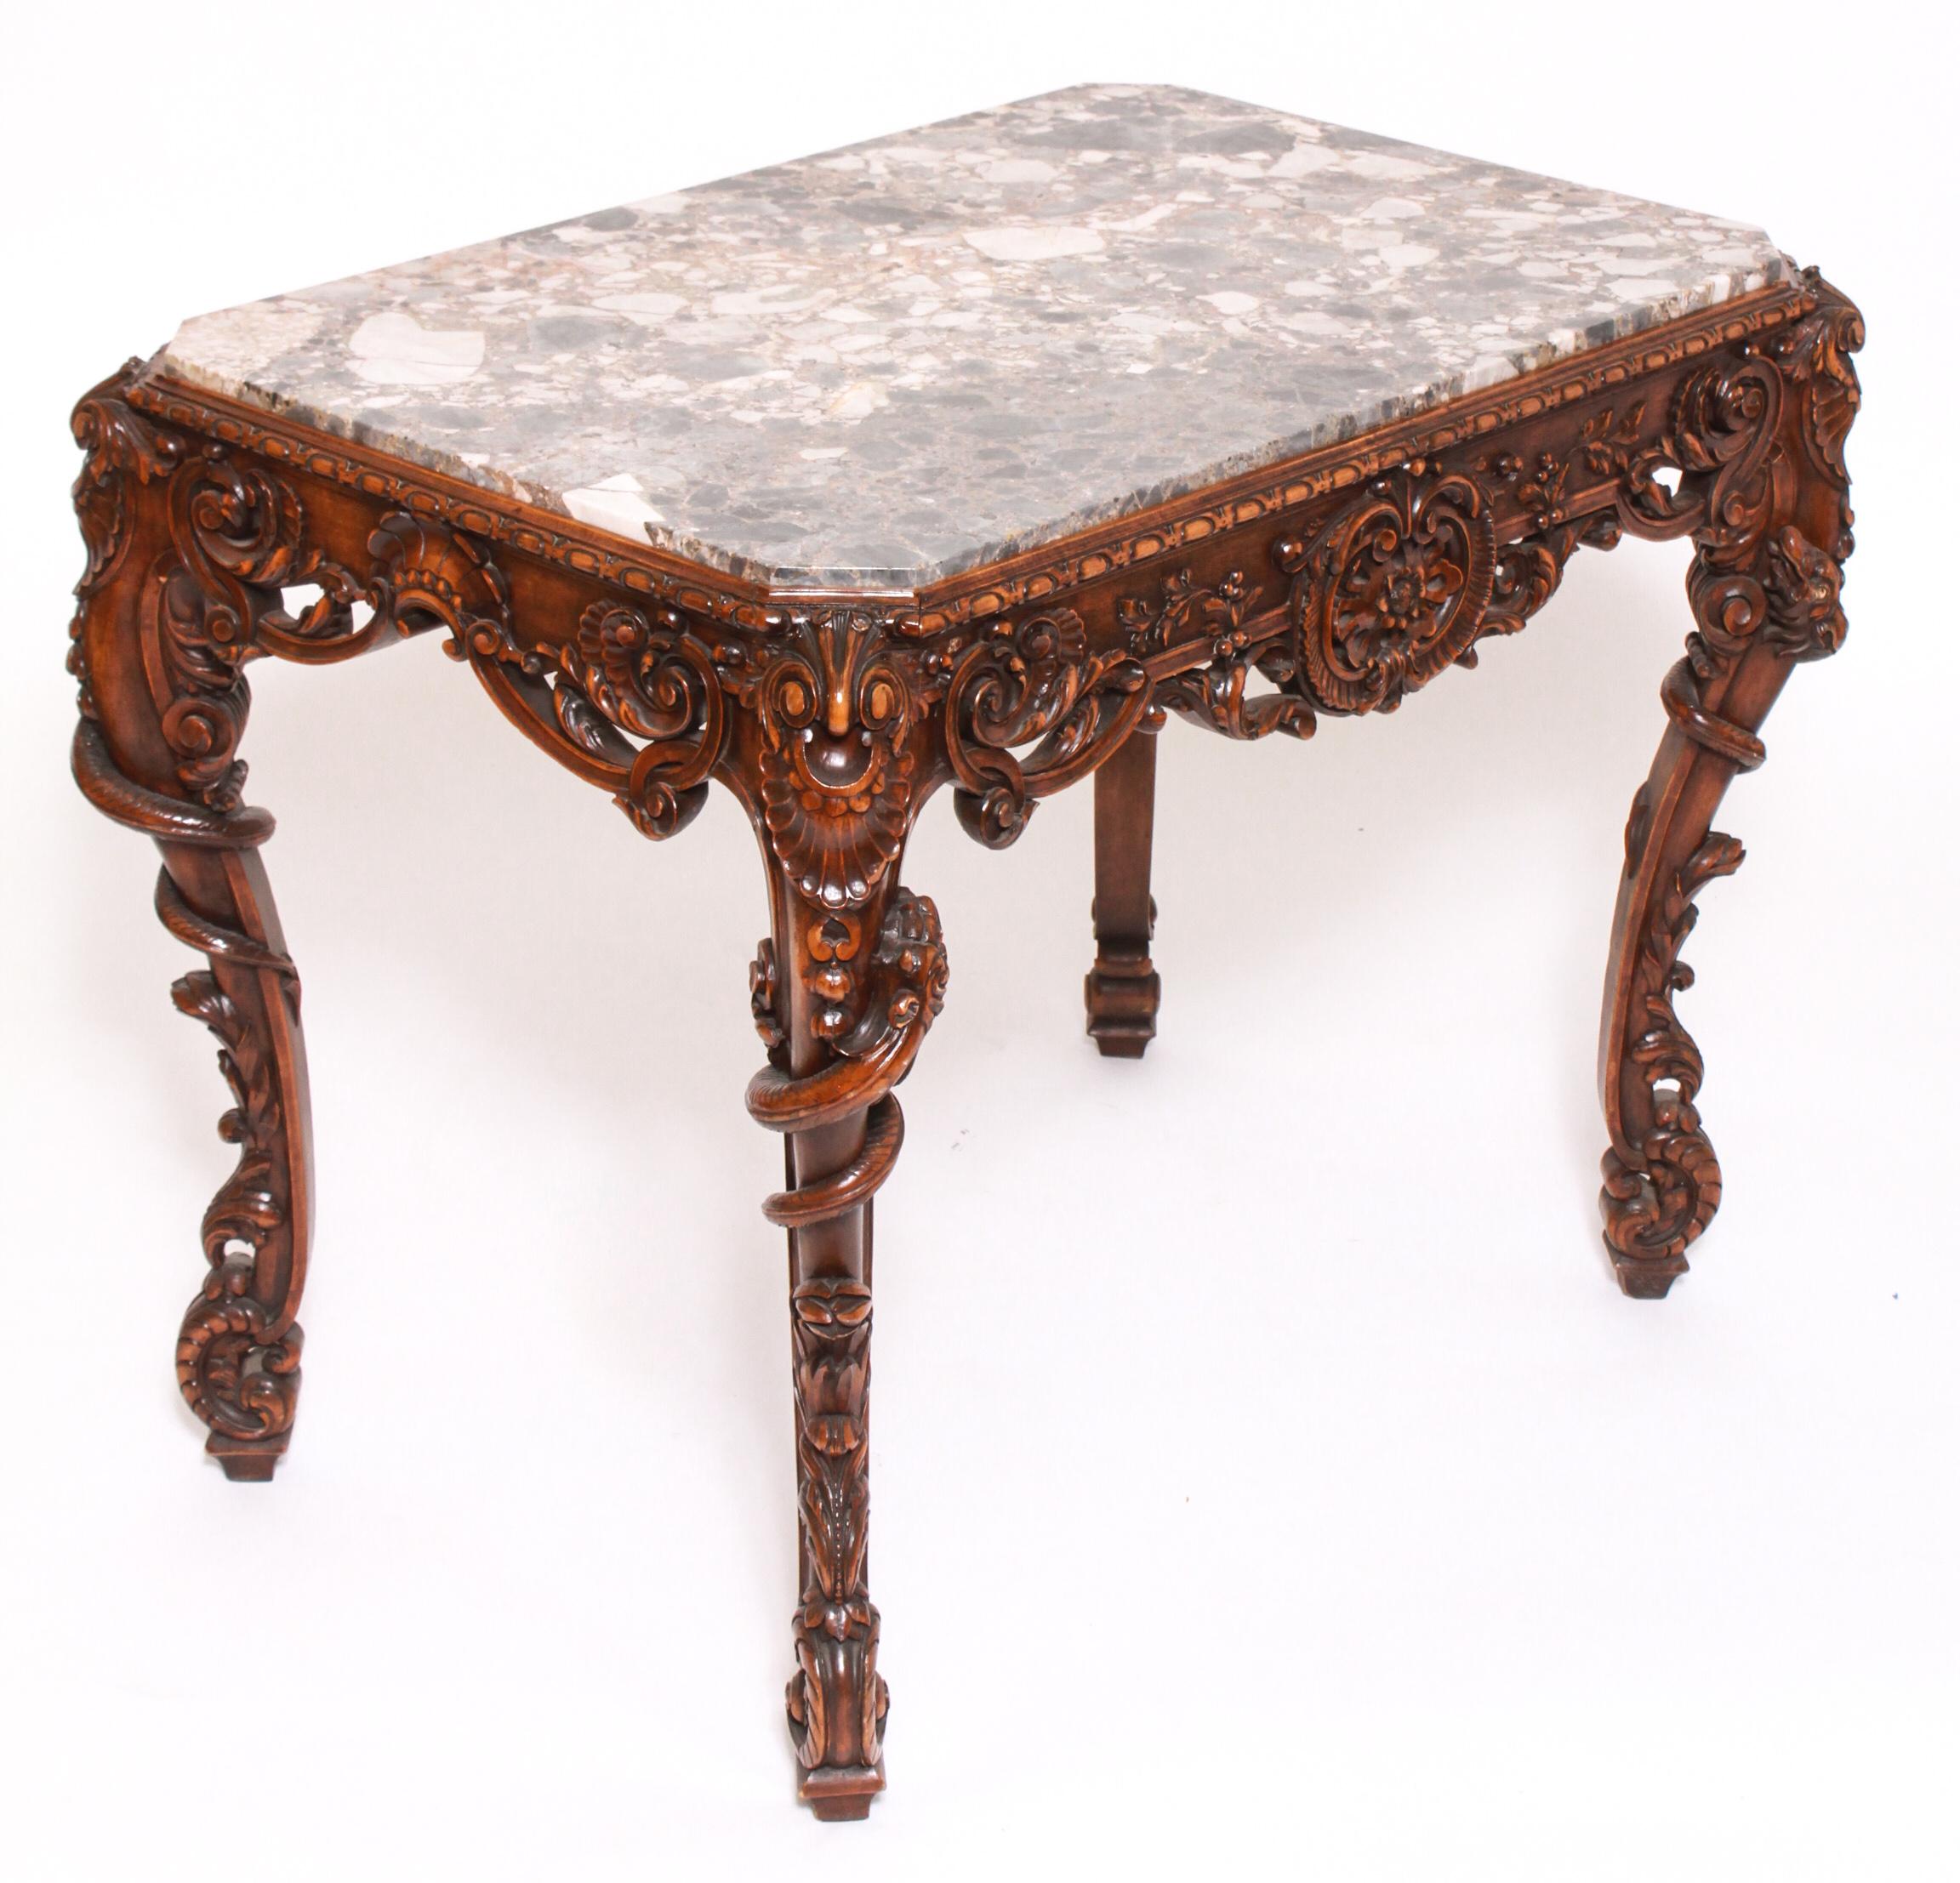 Belgian carved wood and marble-top table, circa 1900, cabriole legs with serpent and foliate motif and scroll form feet, stamped 